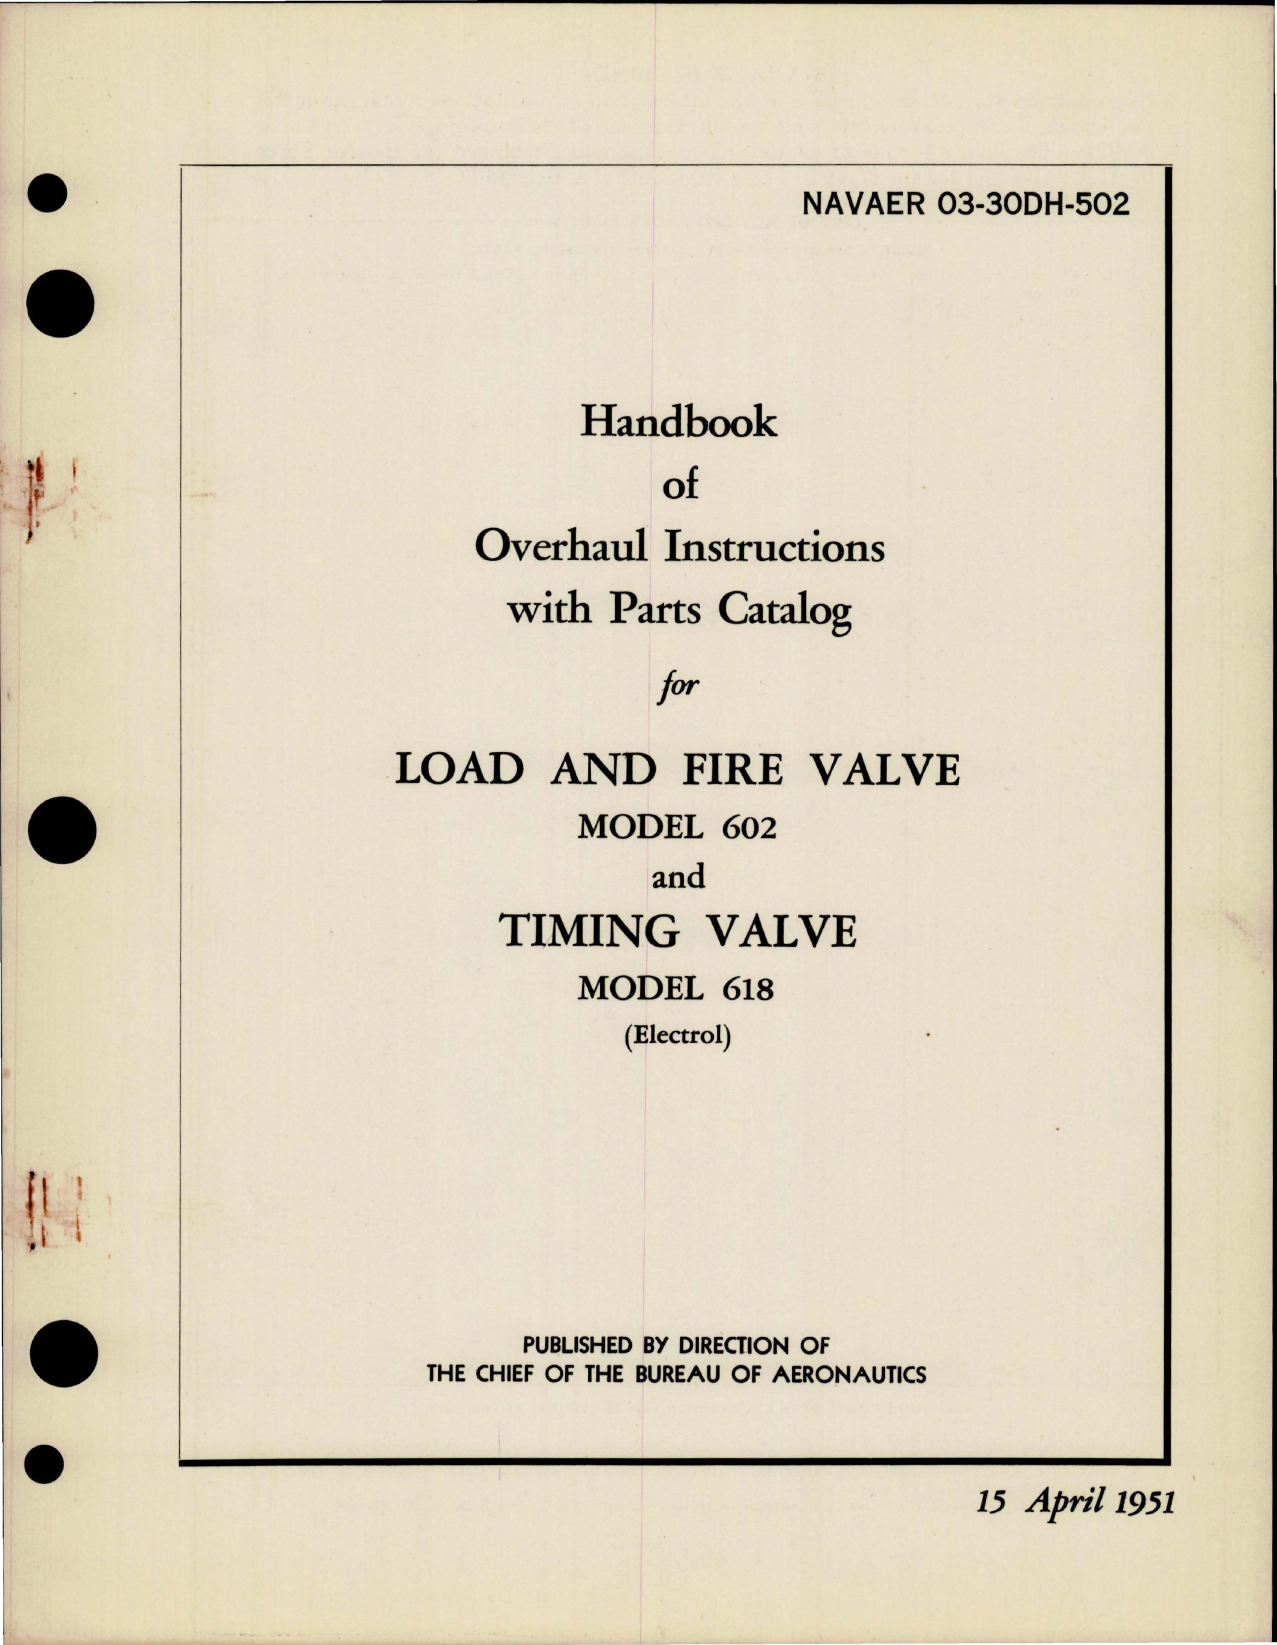 Sample page 1 from AirCorps Library document: Overhaul Instructions with Parts Catalog for Load and Fire Valve 602 and Timing Valve 618 